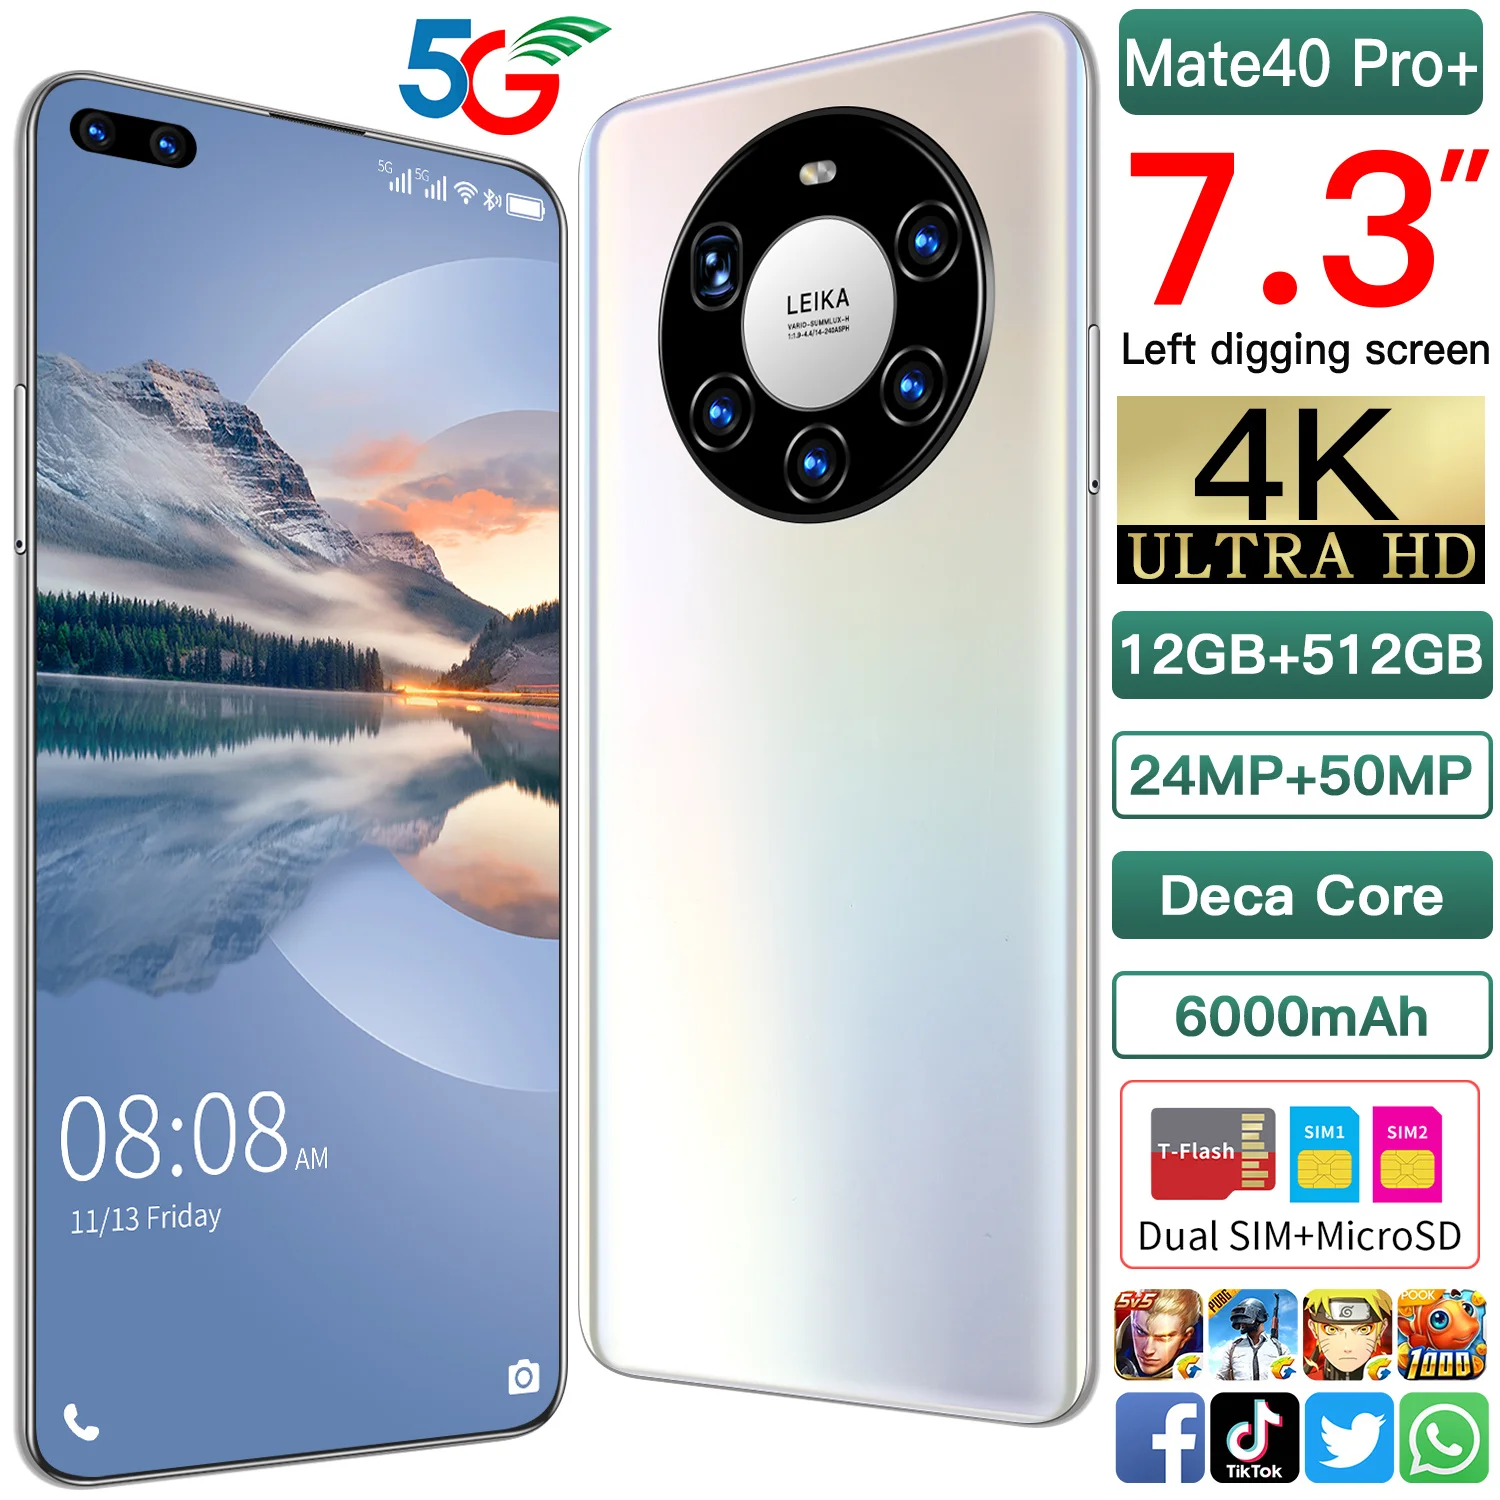 

New Arrival Hot Sale Mate40 Pro+ 7.3 inch Smartphone HD Screen Android 10.0 Telephone Smartphone 12GB+512GB Cellphone, Colors